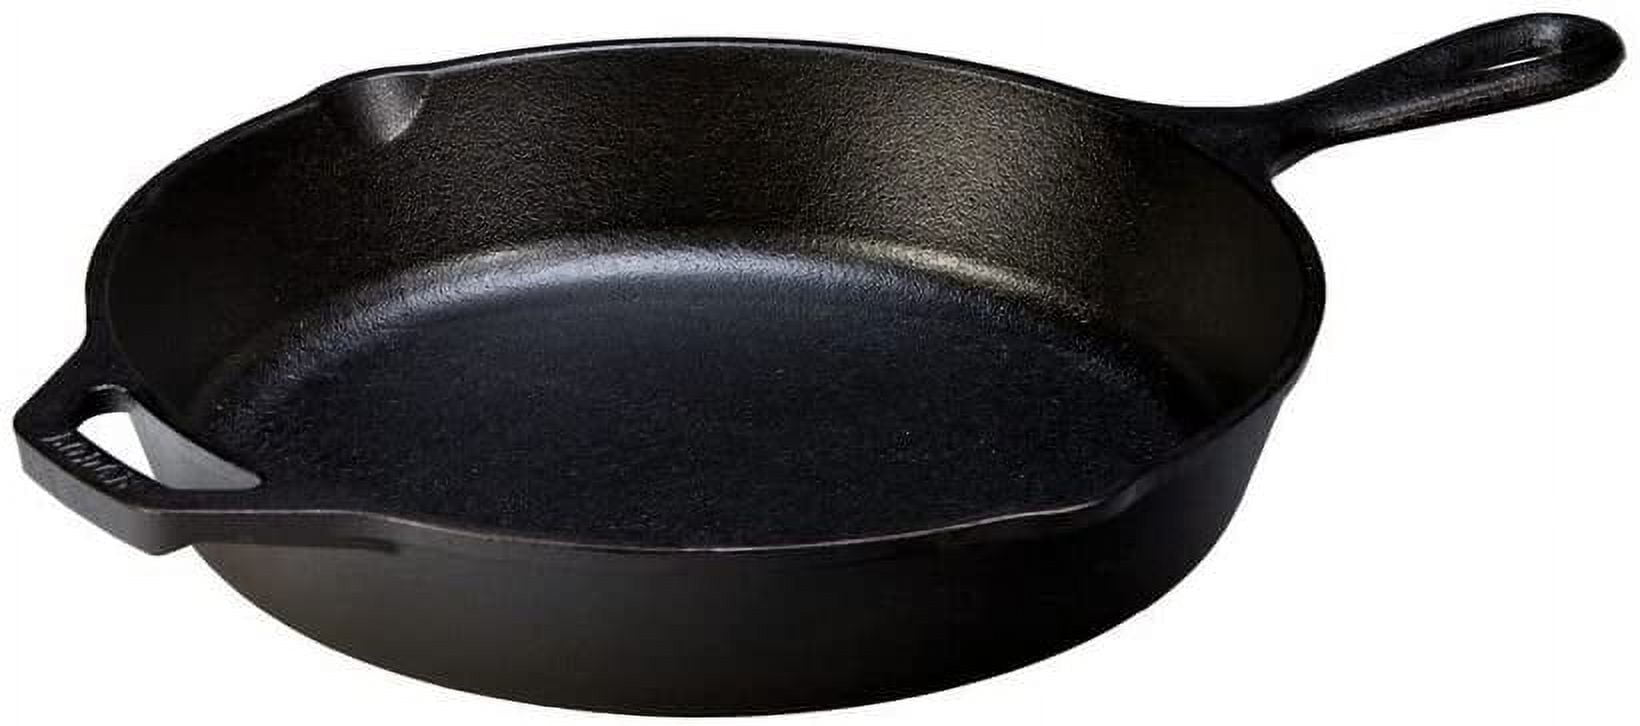 Lodge 10.5 in. Cast Iron Grill Pan in Black L8SGP3 - The Home Depot